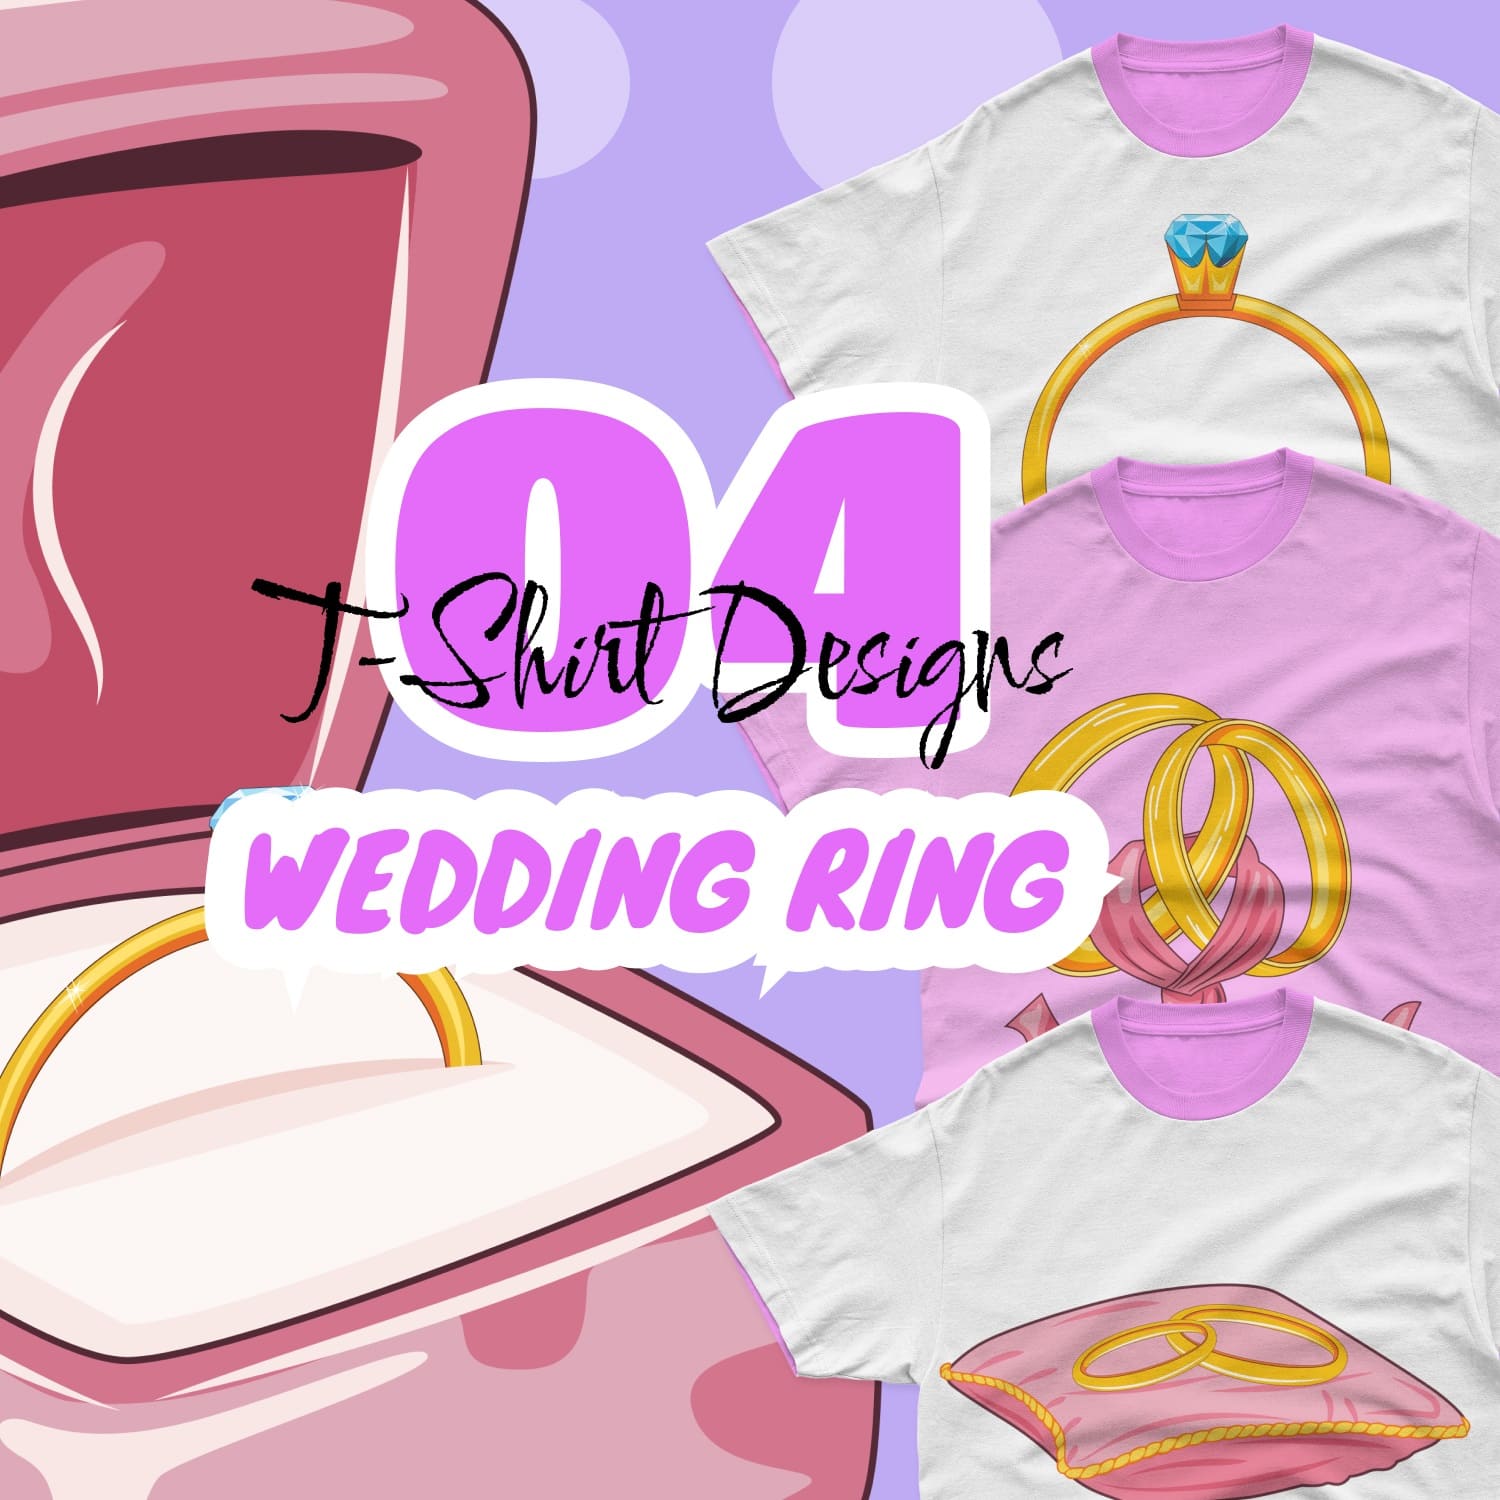 Pink and white t-shirts with gold wedding rings.